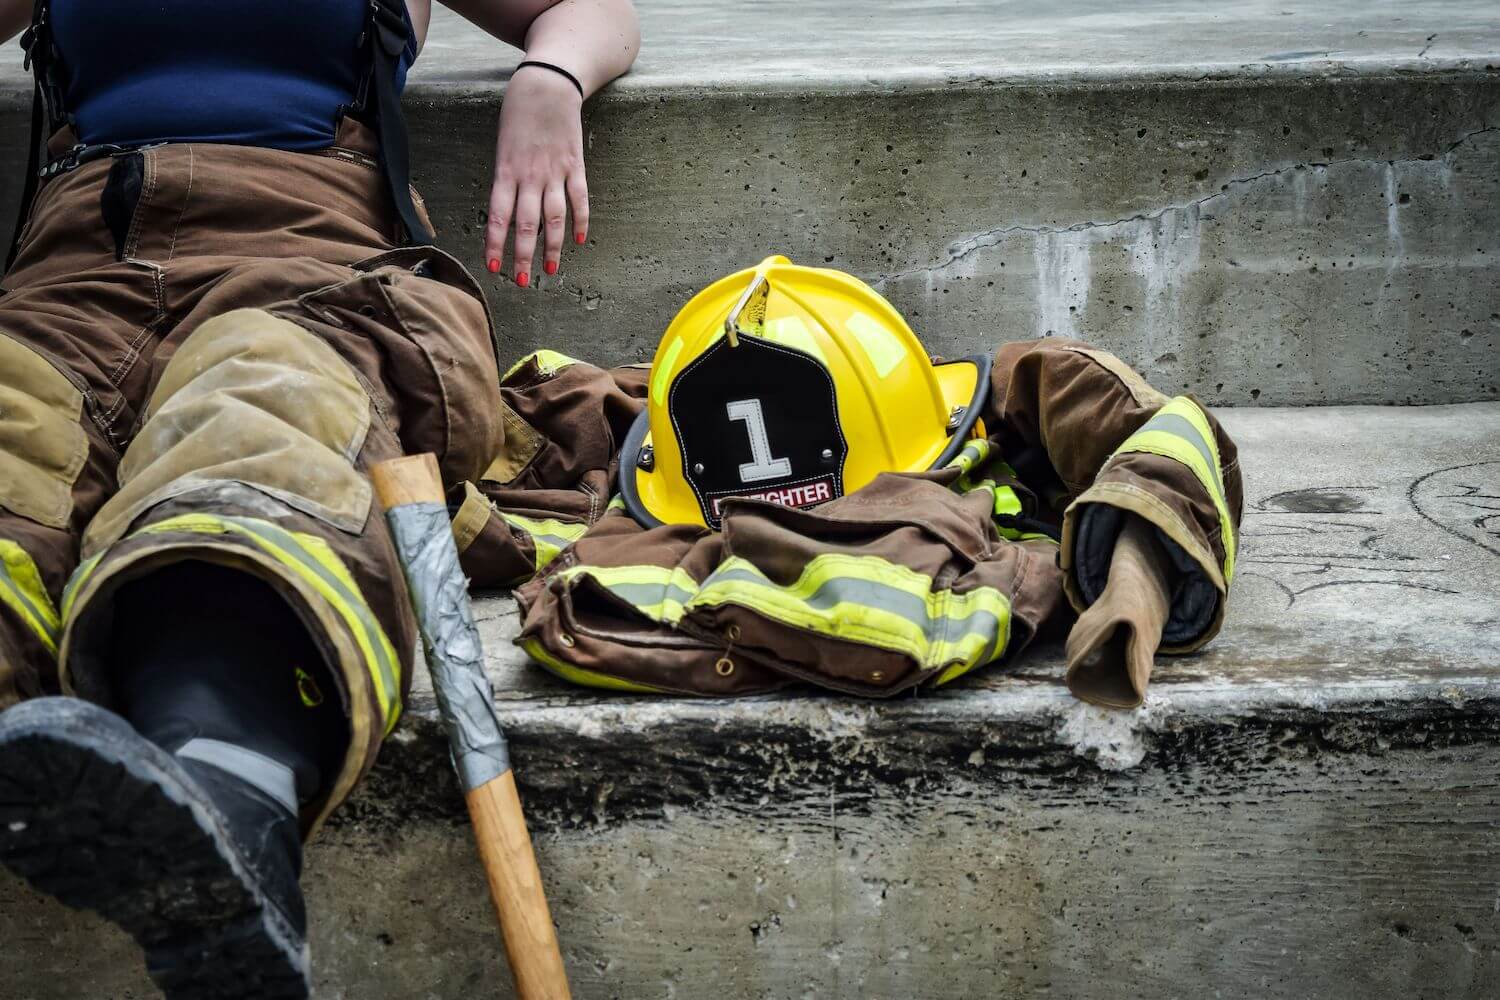 Firefighter resting after putting out fire